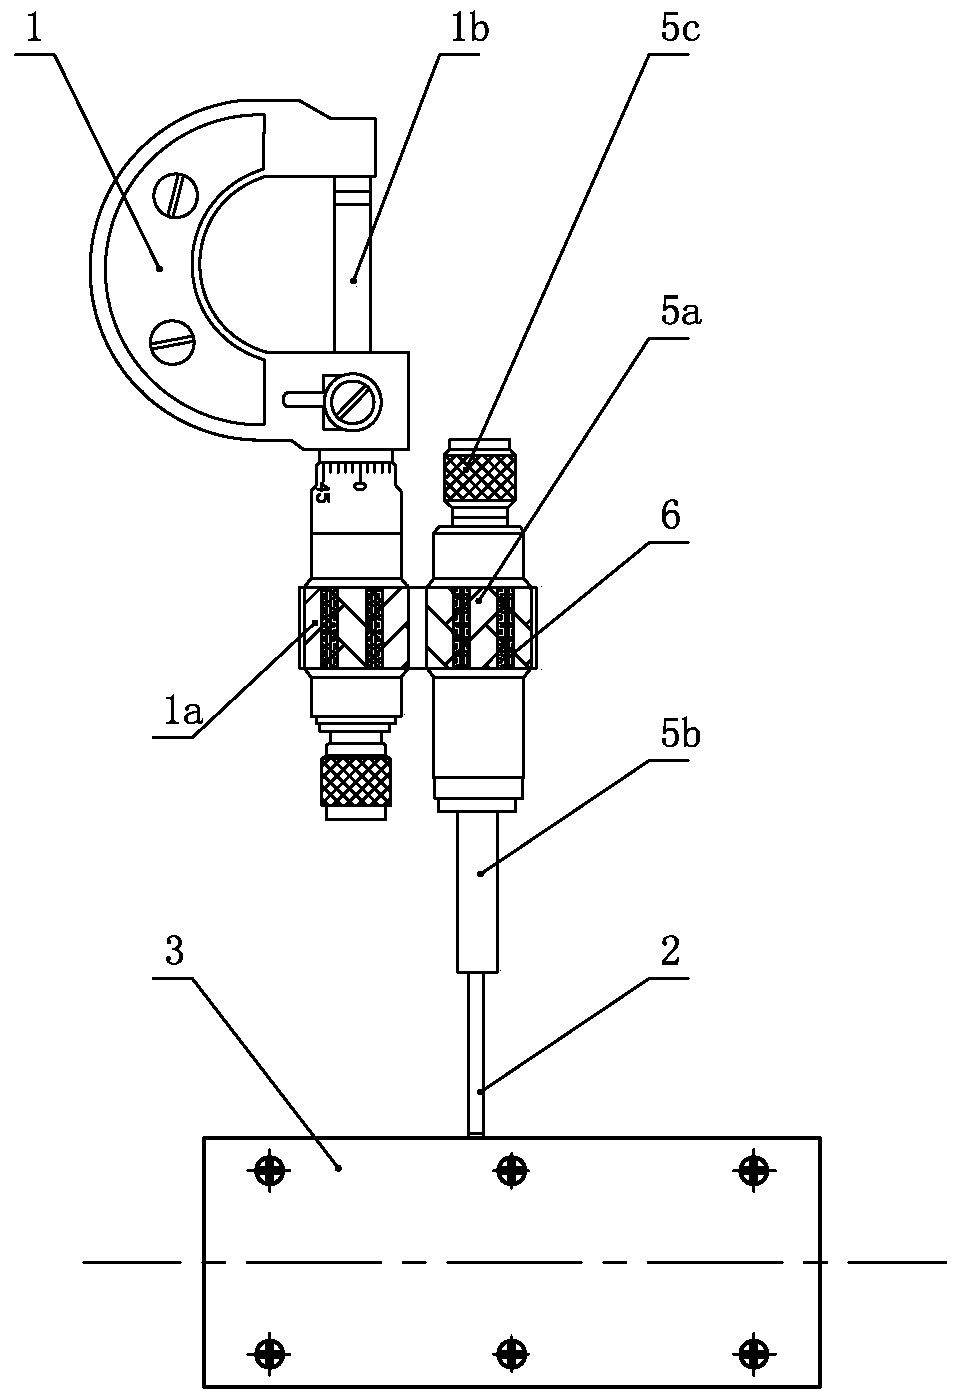 A device and method for making needle point defects for cable testing